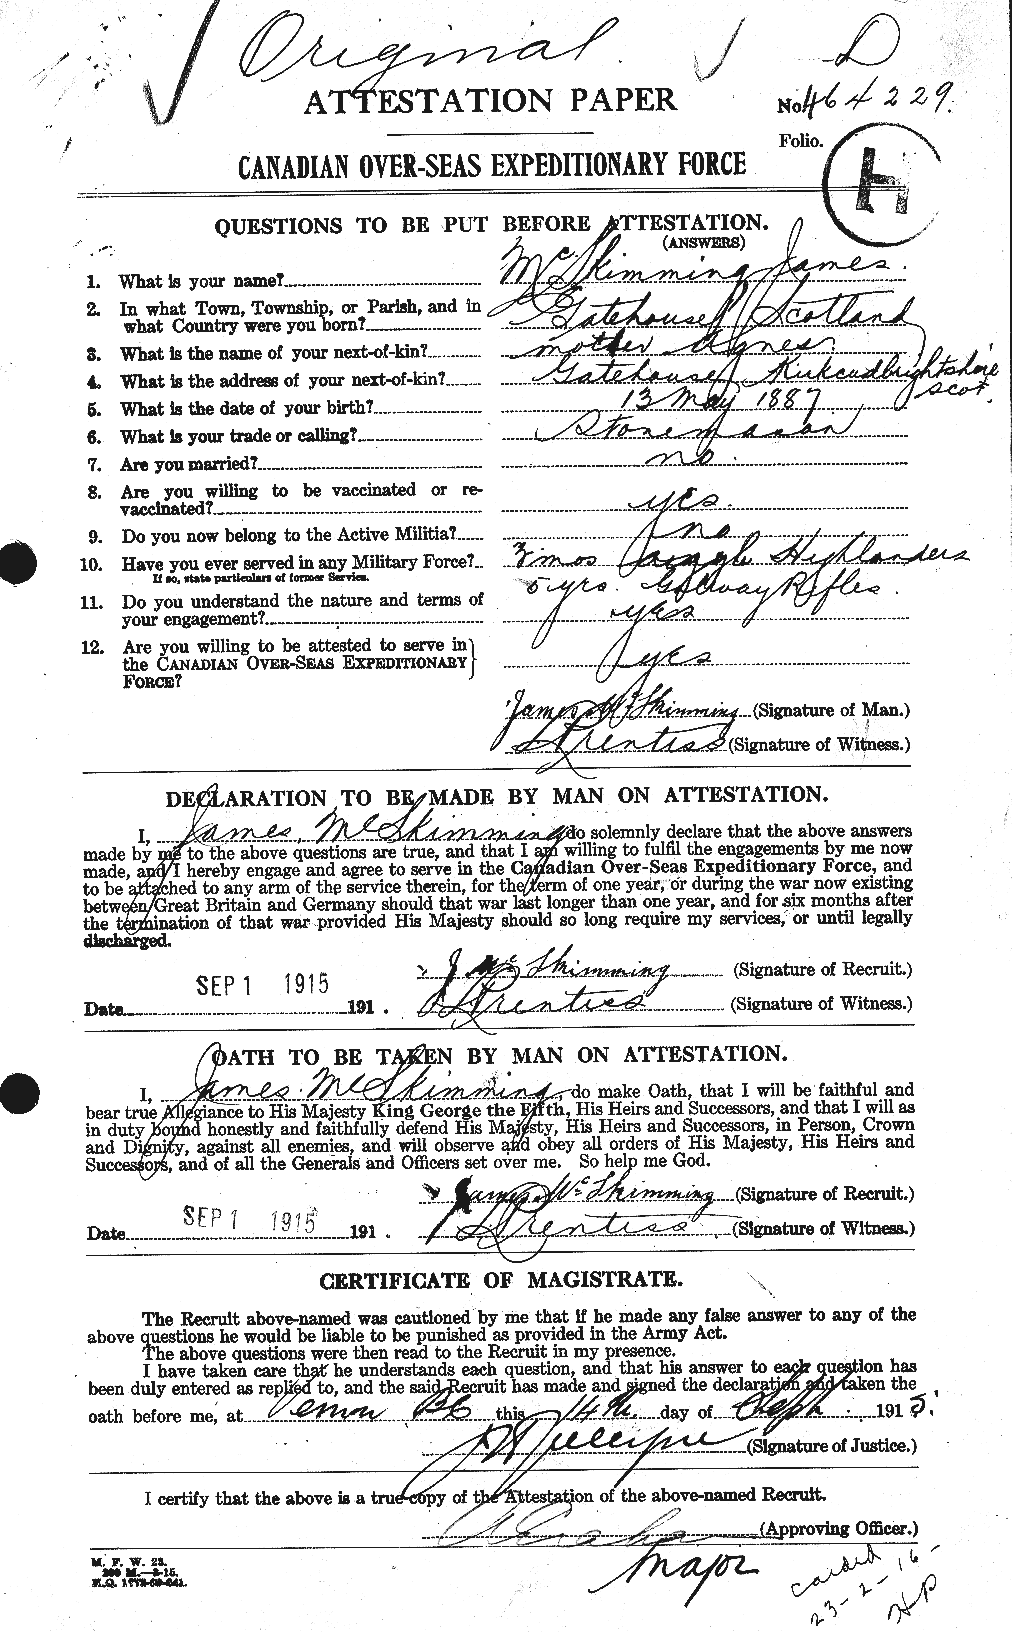 Personnel Records of the First World War - CEF 544827a